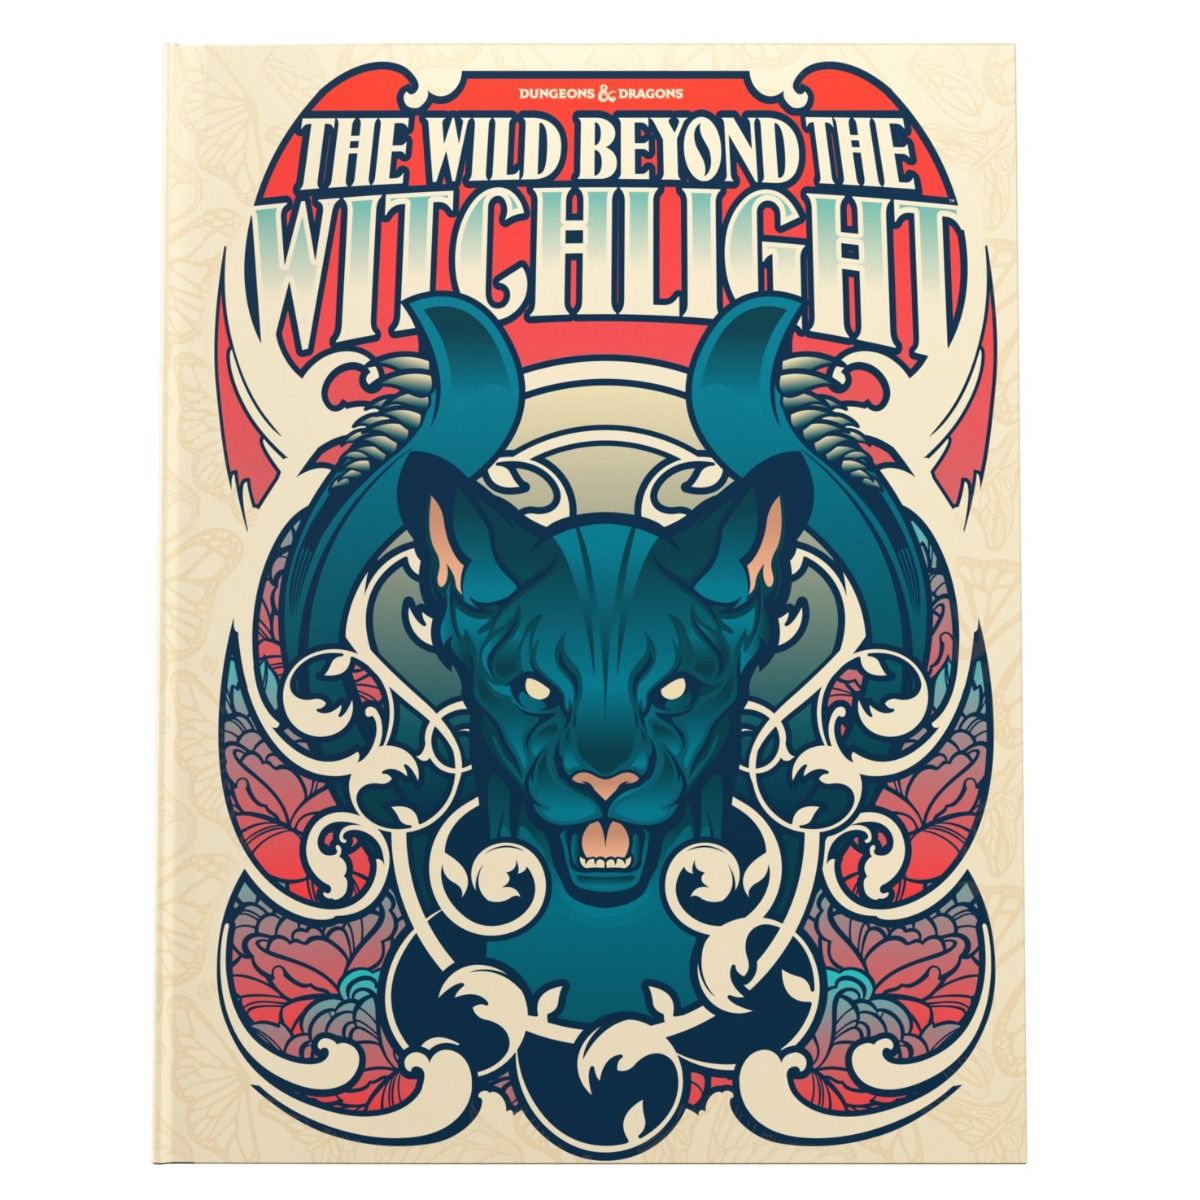 D&amp;D Adventure - The Wild Beyond the Witchlight (Alternative Cover)